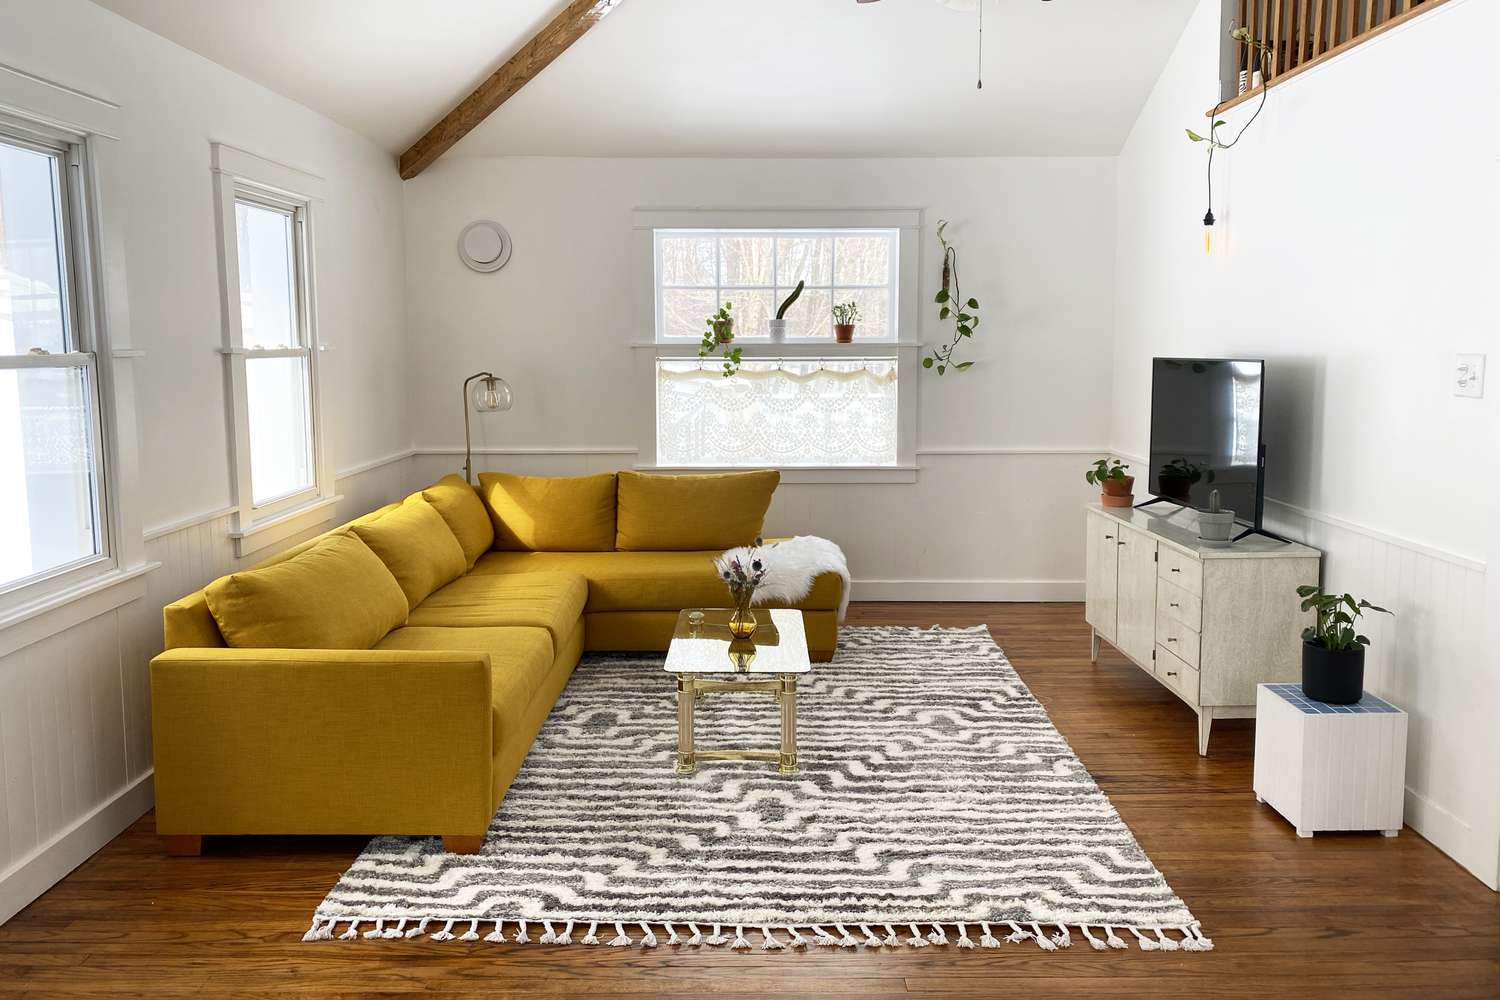 Placement of an Area Rug in a Living Room